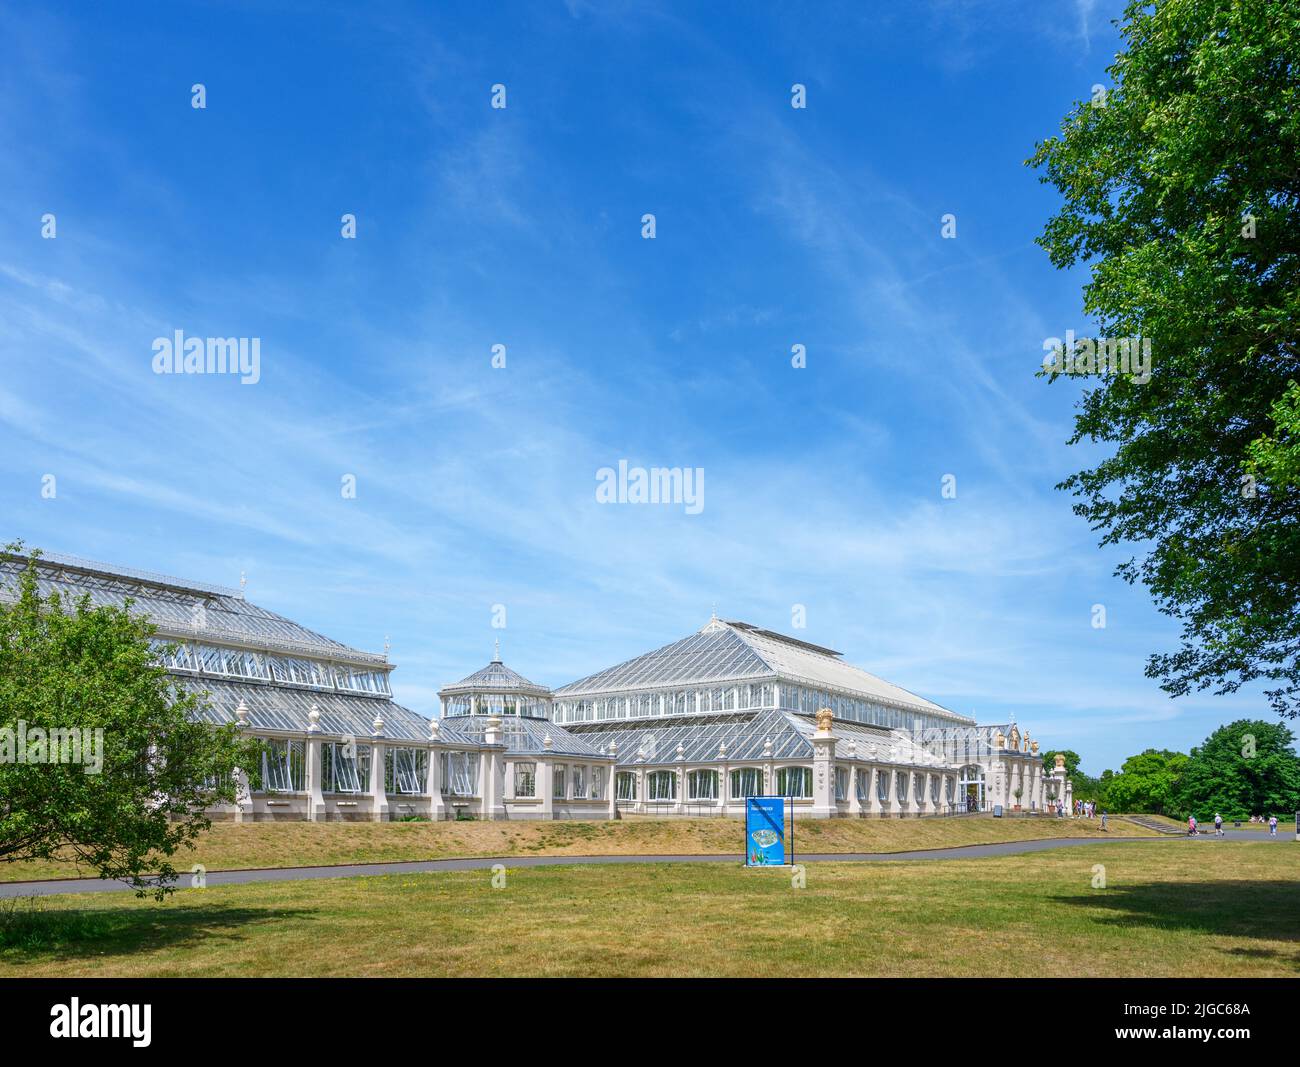 The Temperate House, Kew Gardens, Richmond, Londres, Angleterre, ROYAUME-UNI Banque D'Images